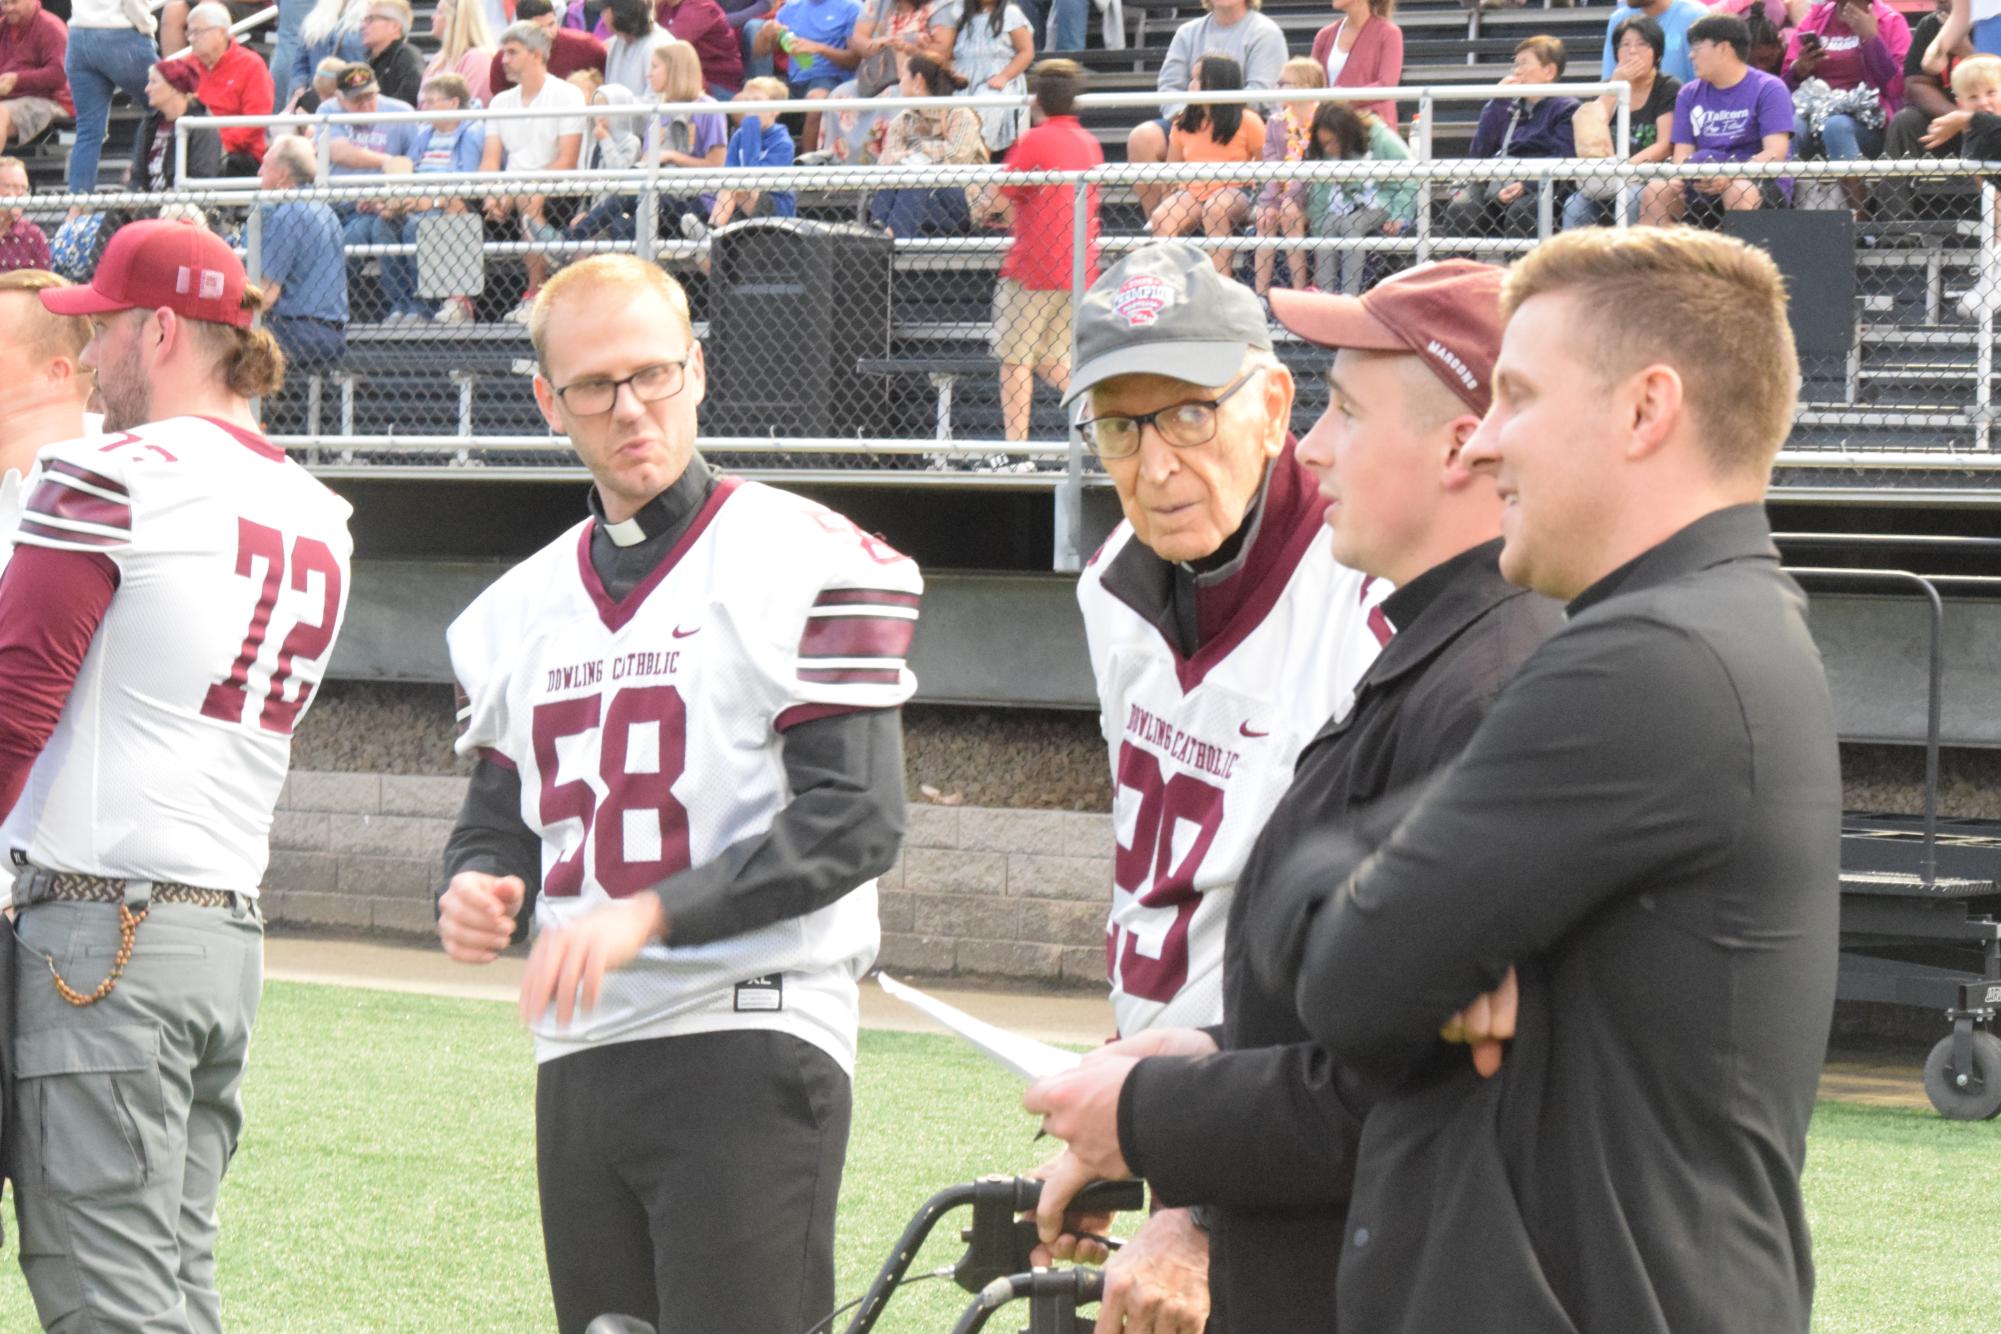 Father Andrew, Father Acrea, Father Downey, and Father Flood stand on the sideline at a football game.